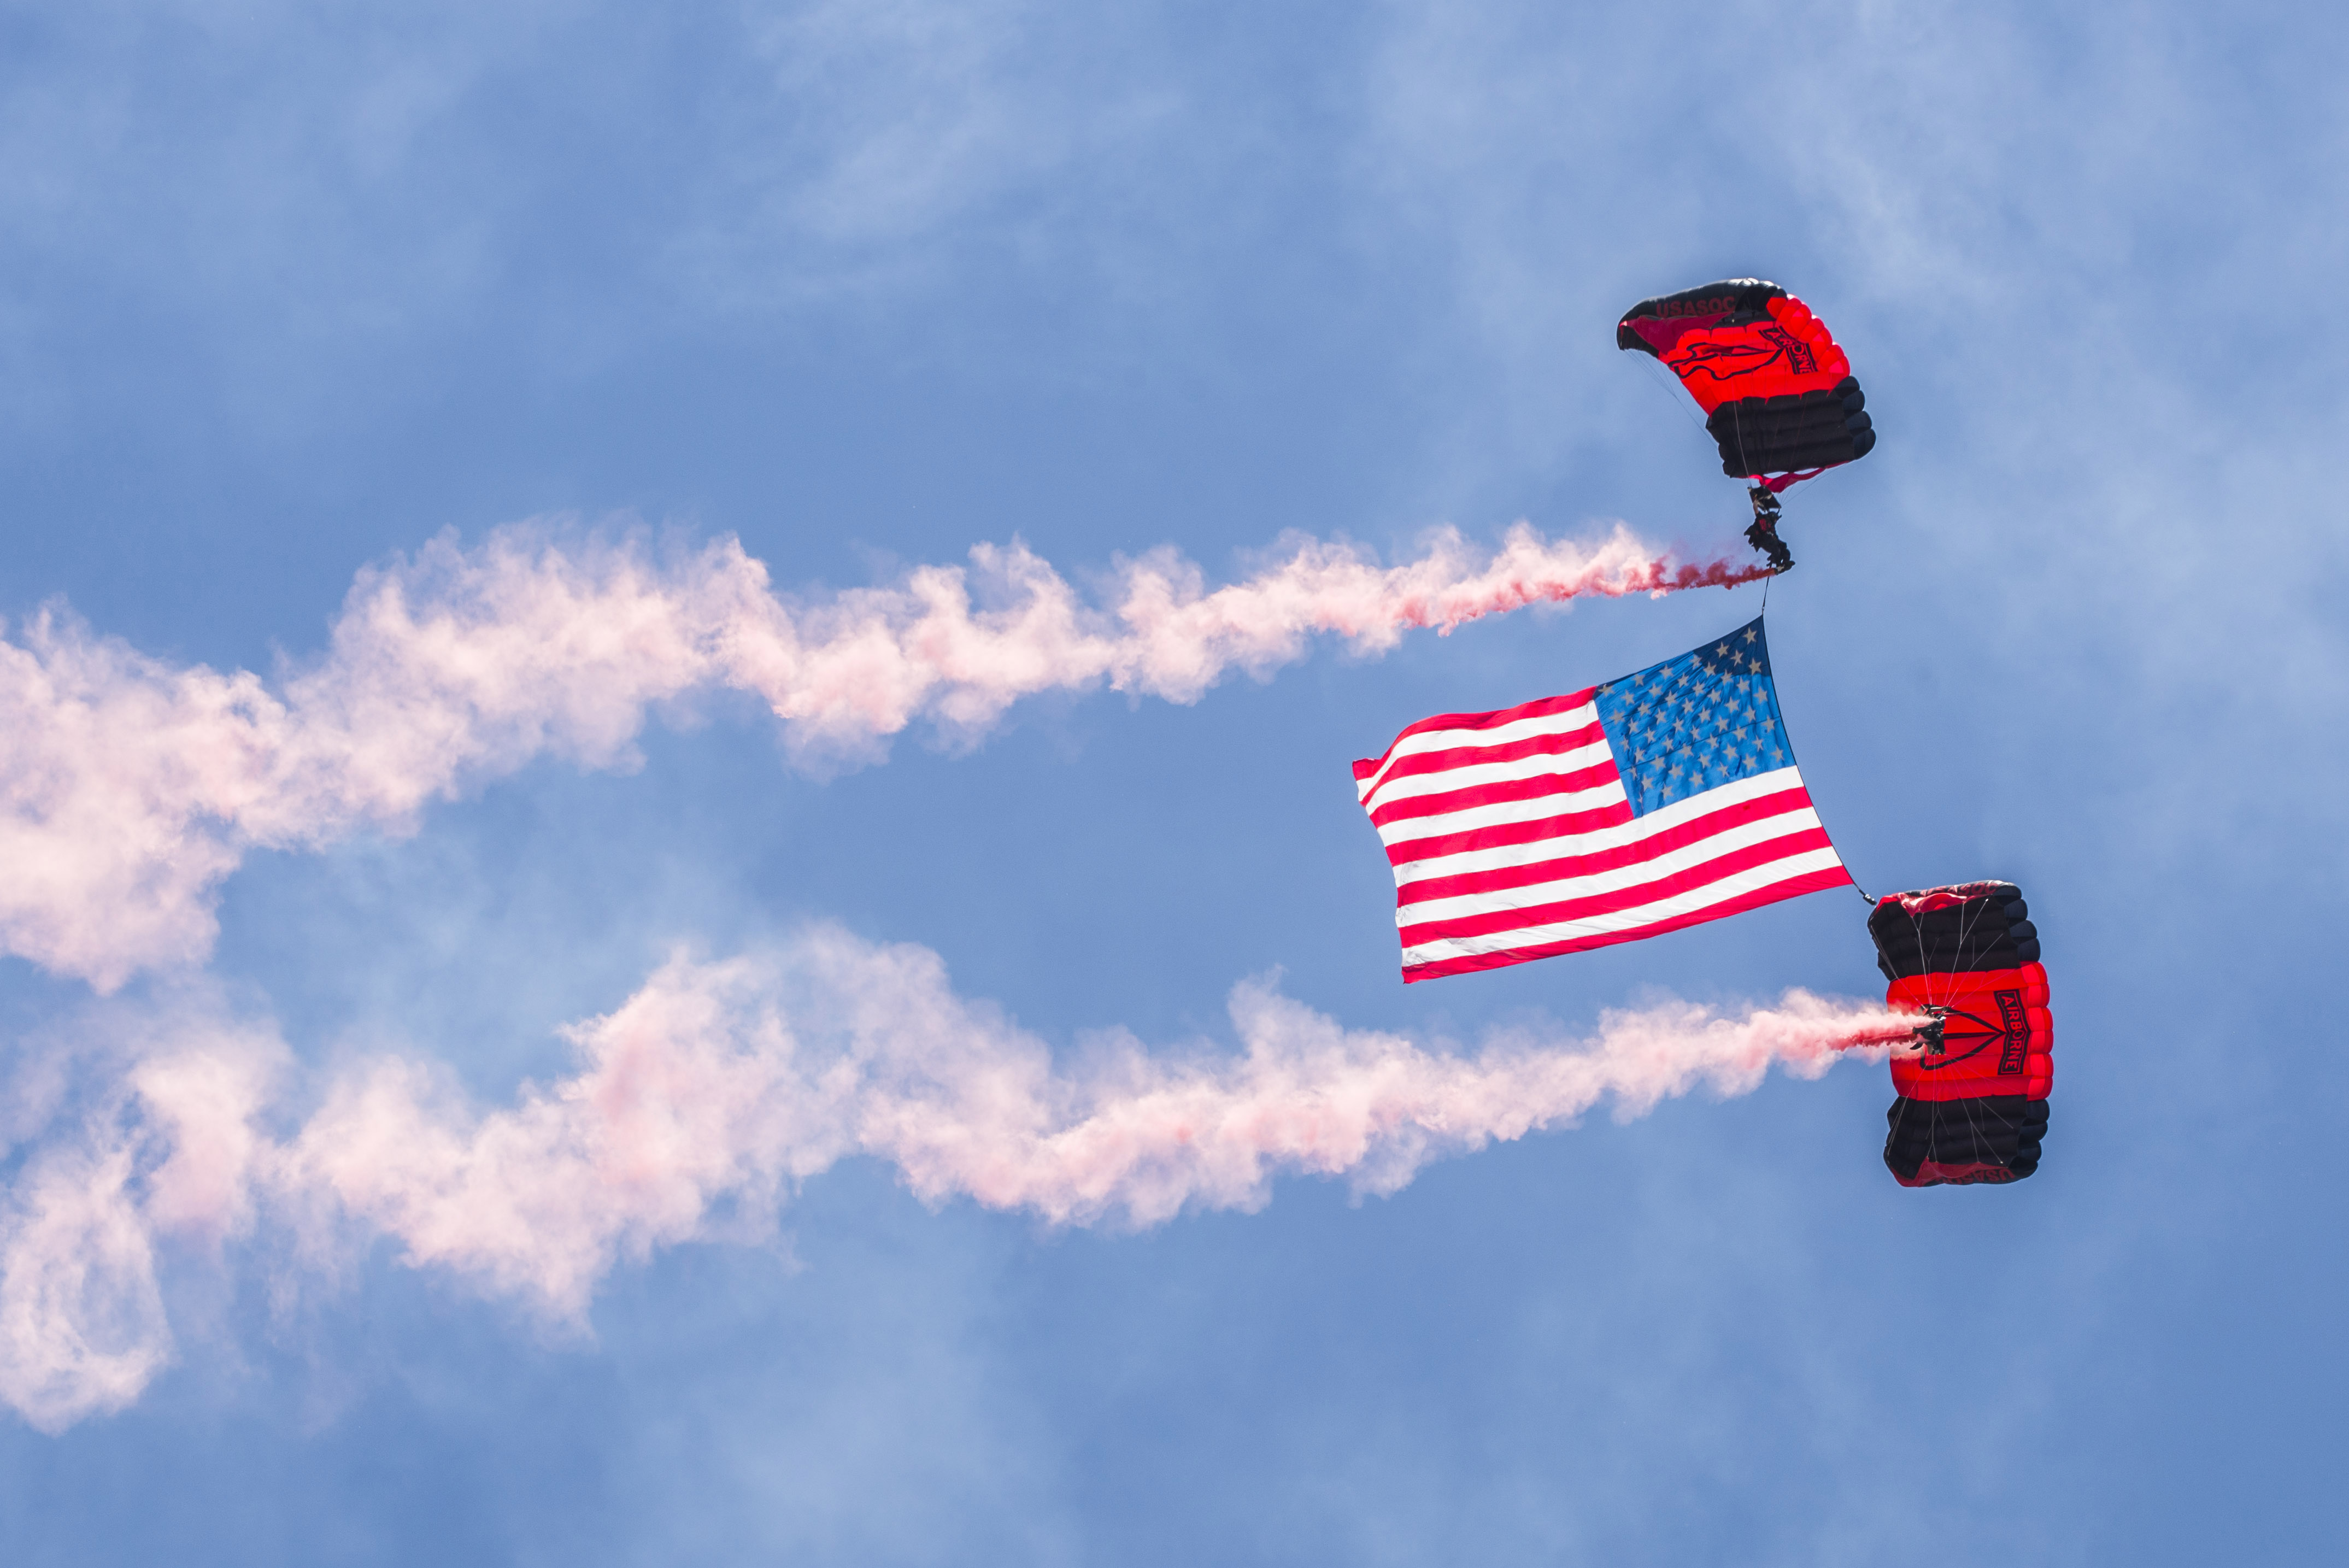 Scott Air Force Base puts on a show for 100th anniversary Chronicle Media